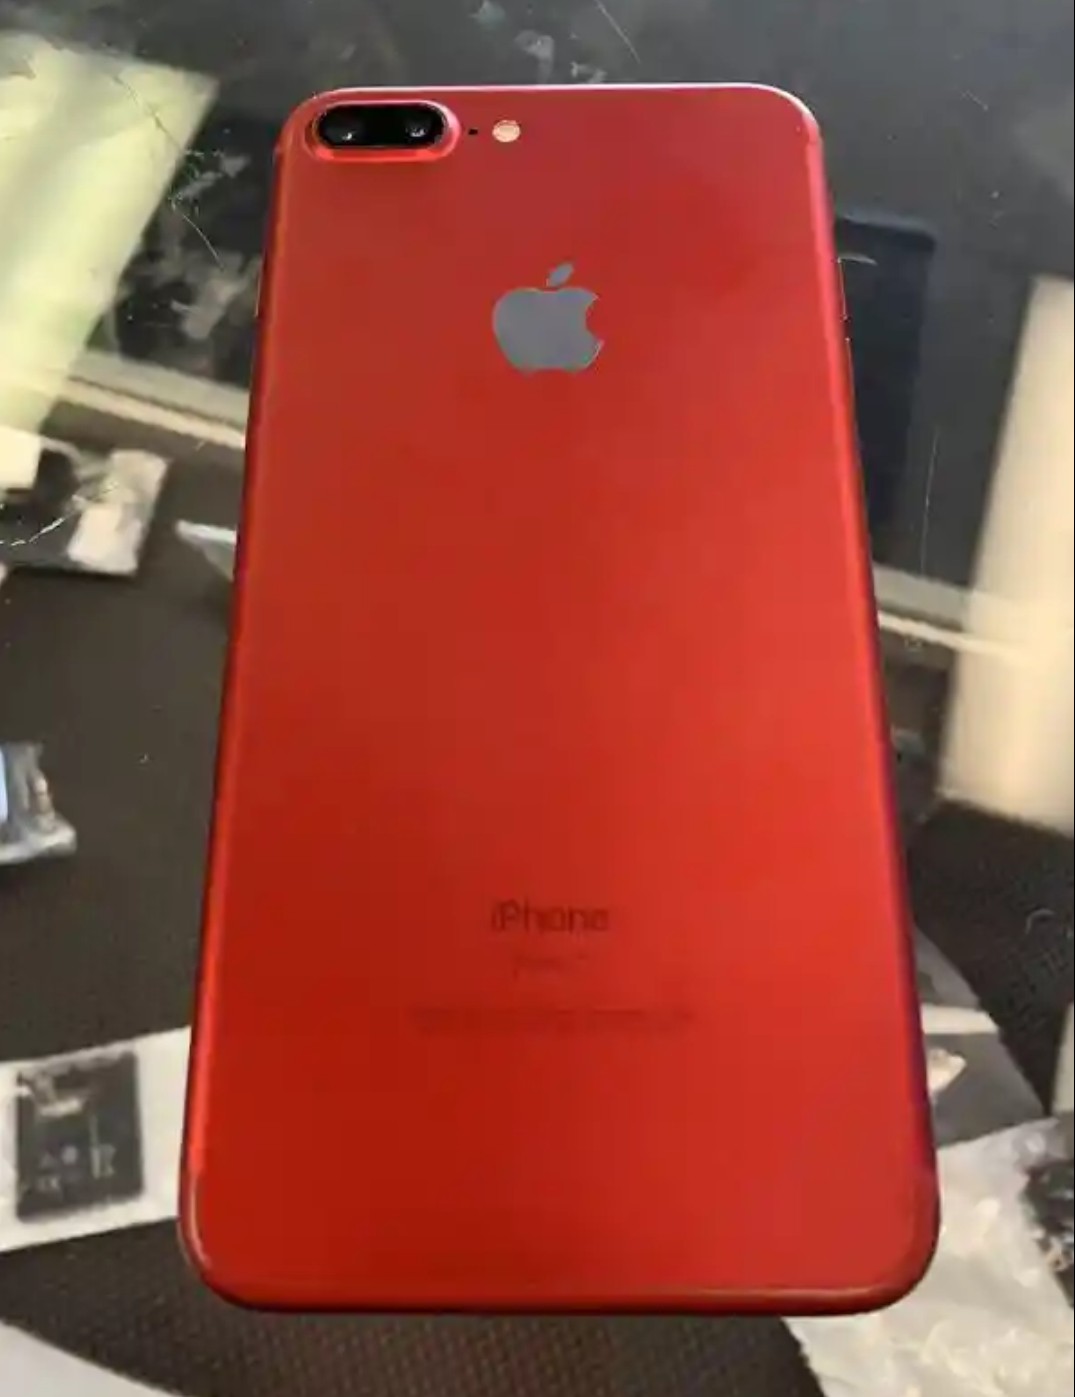 Iphone 7 Plus 128gb Factory Unlocked Red Edition Technology Market